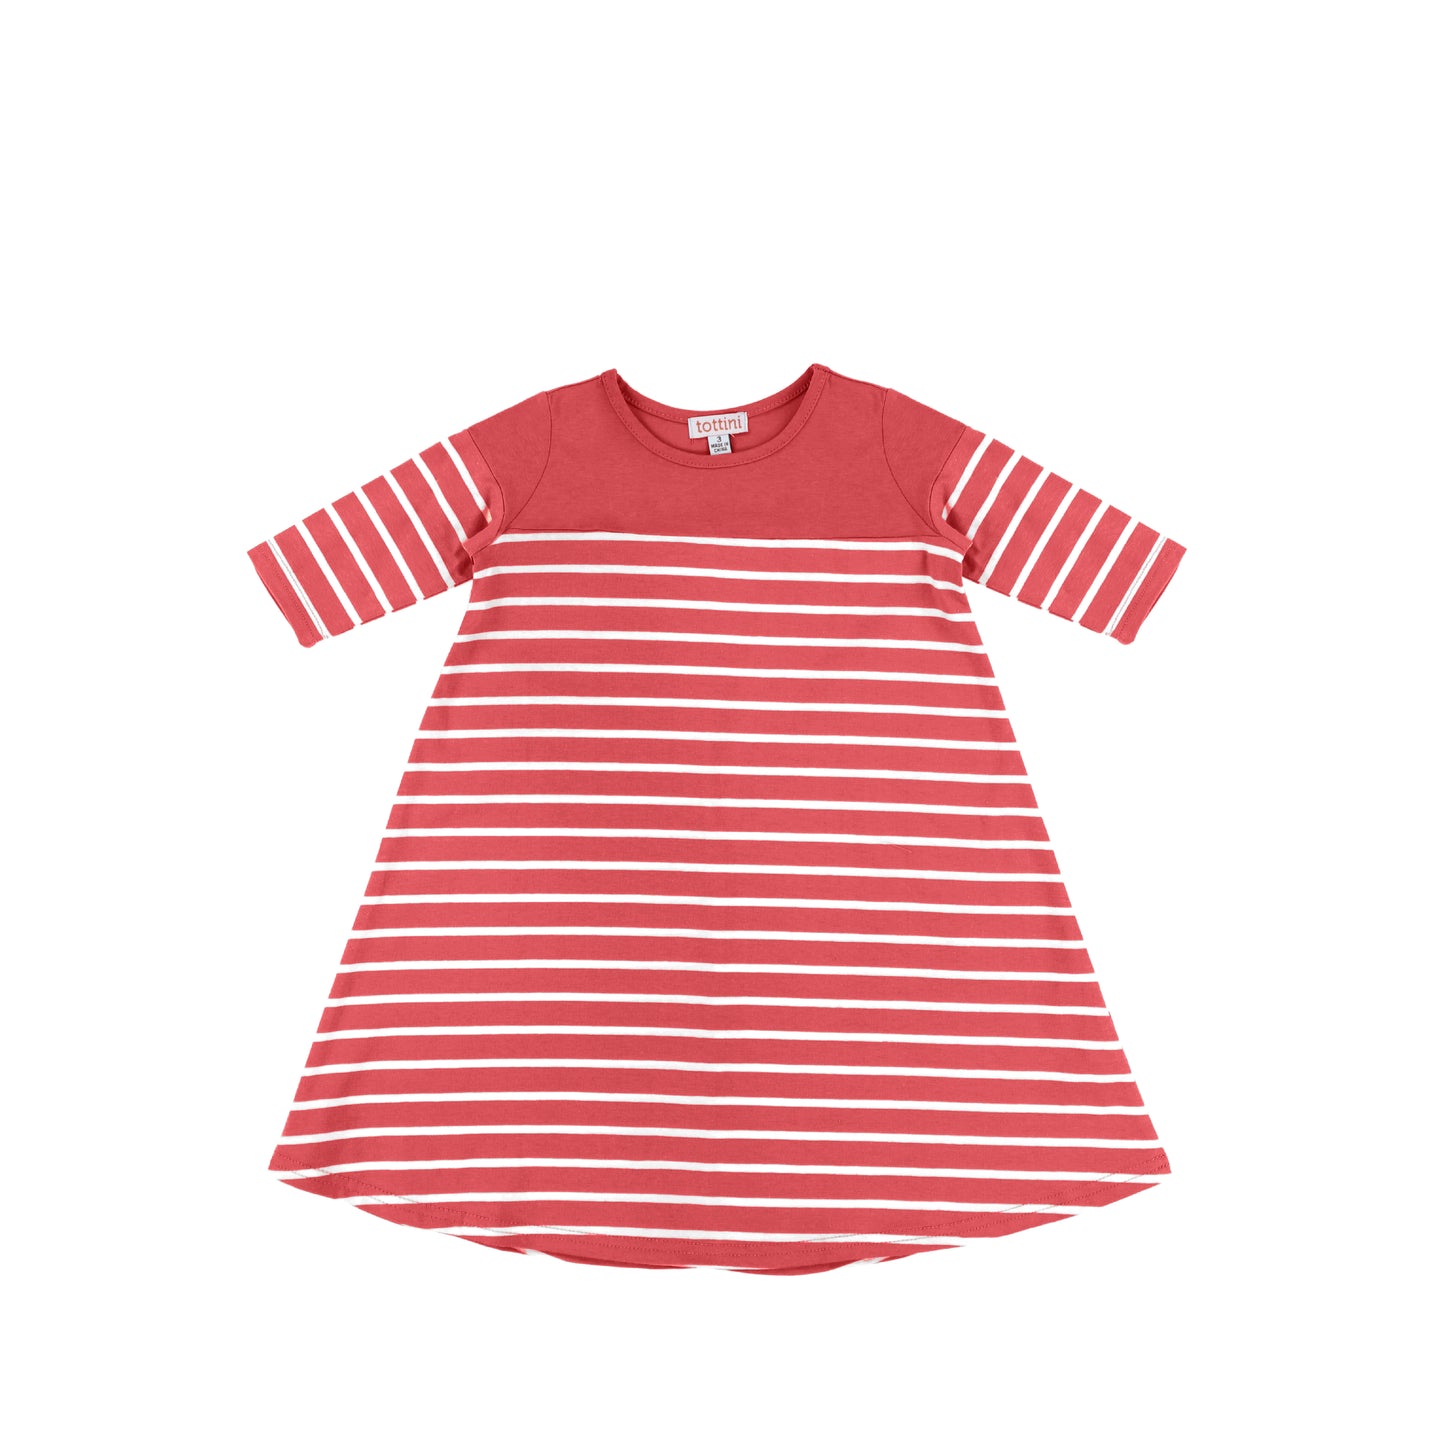 3/4 SLEEVES STRIPED FLAIRY DRESS